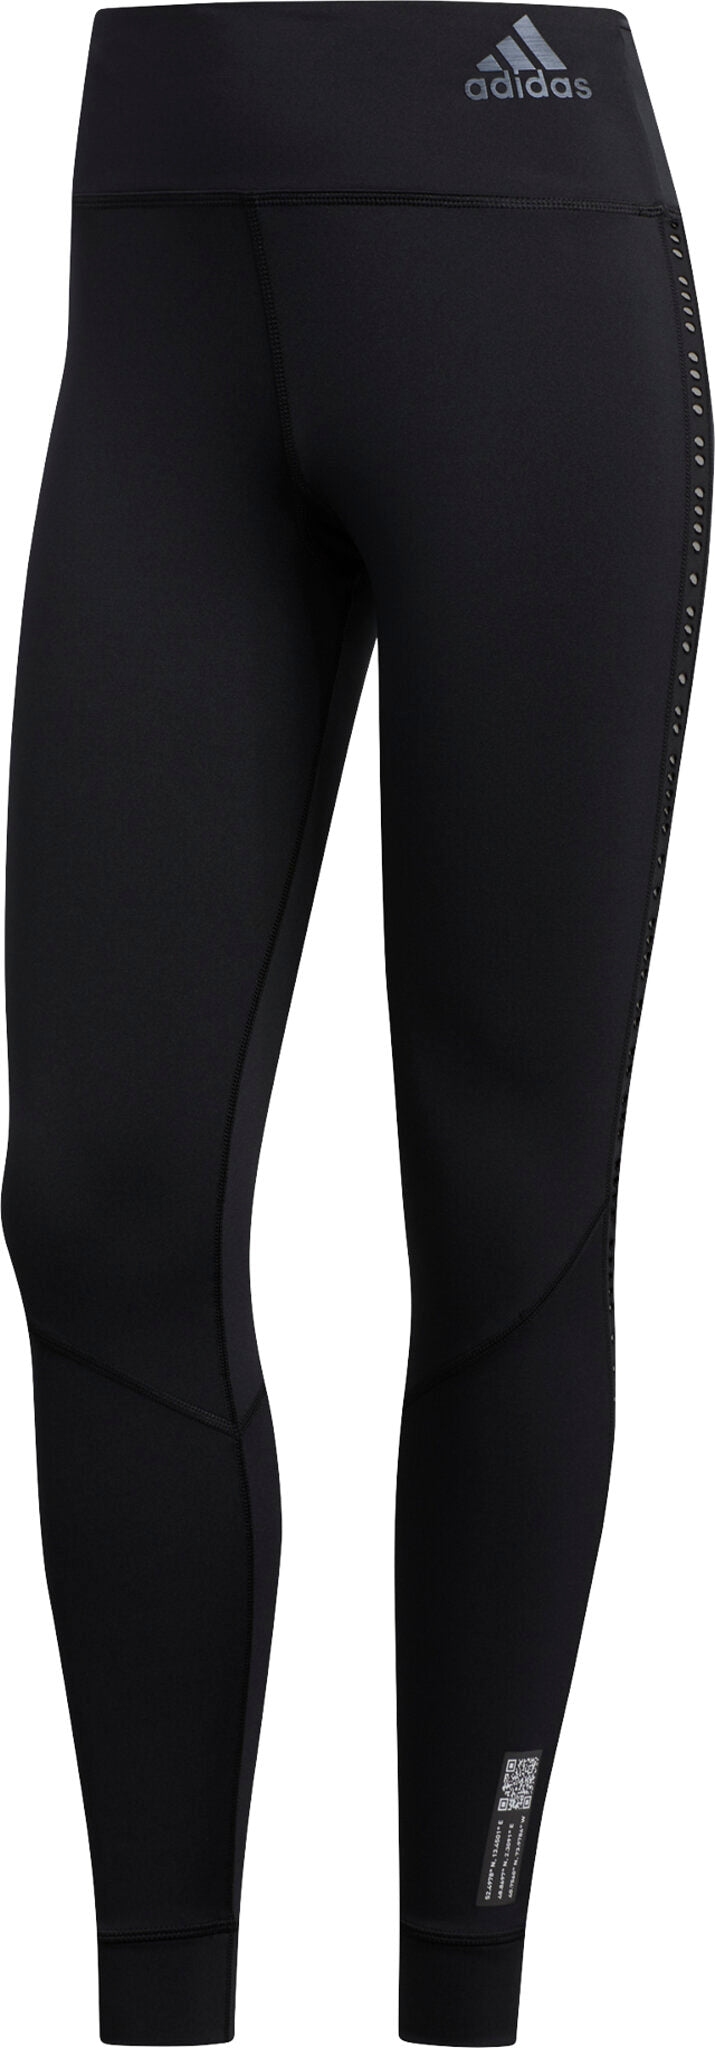 Adidas Own The Run Primeblue Tights Women's Large